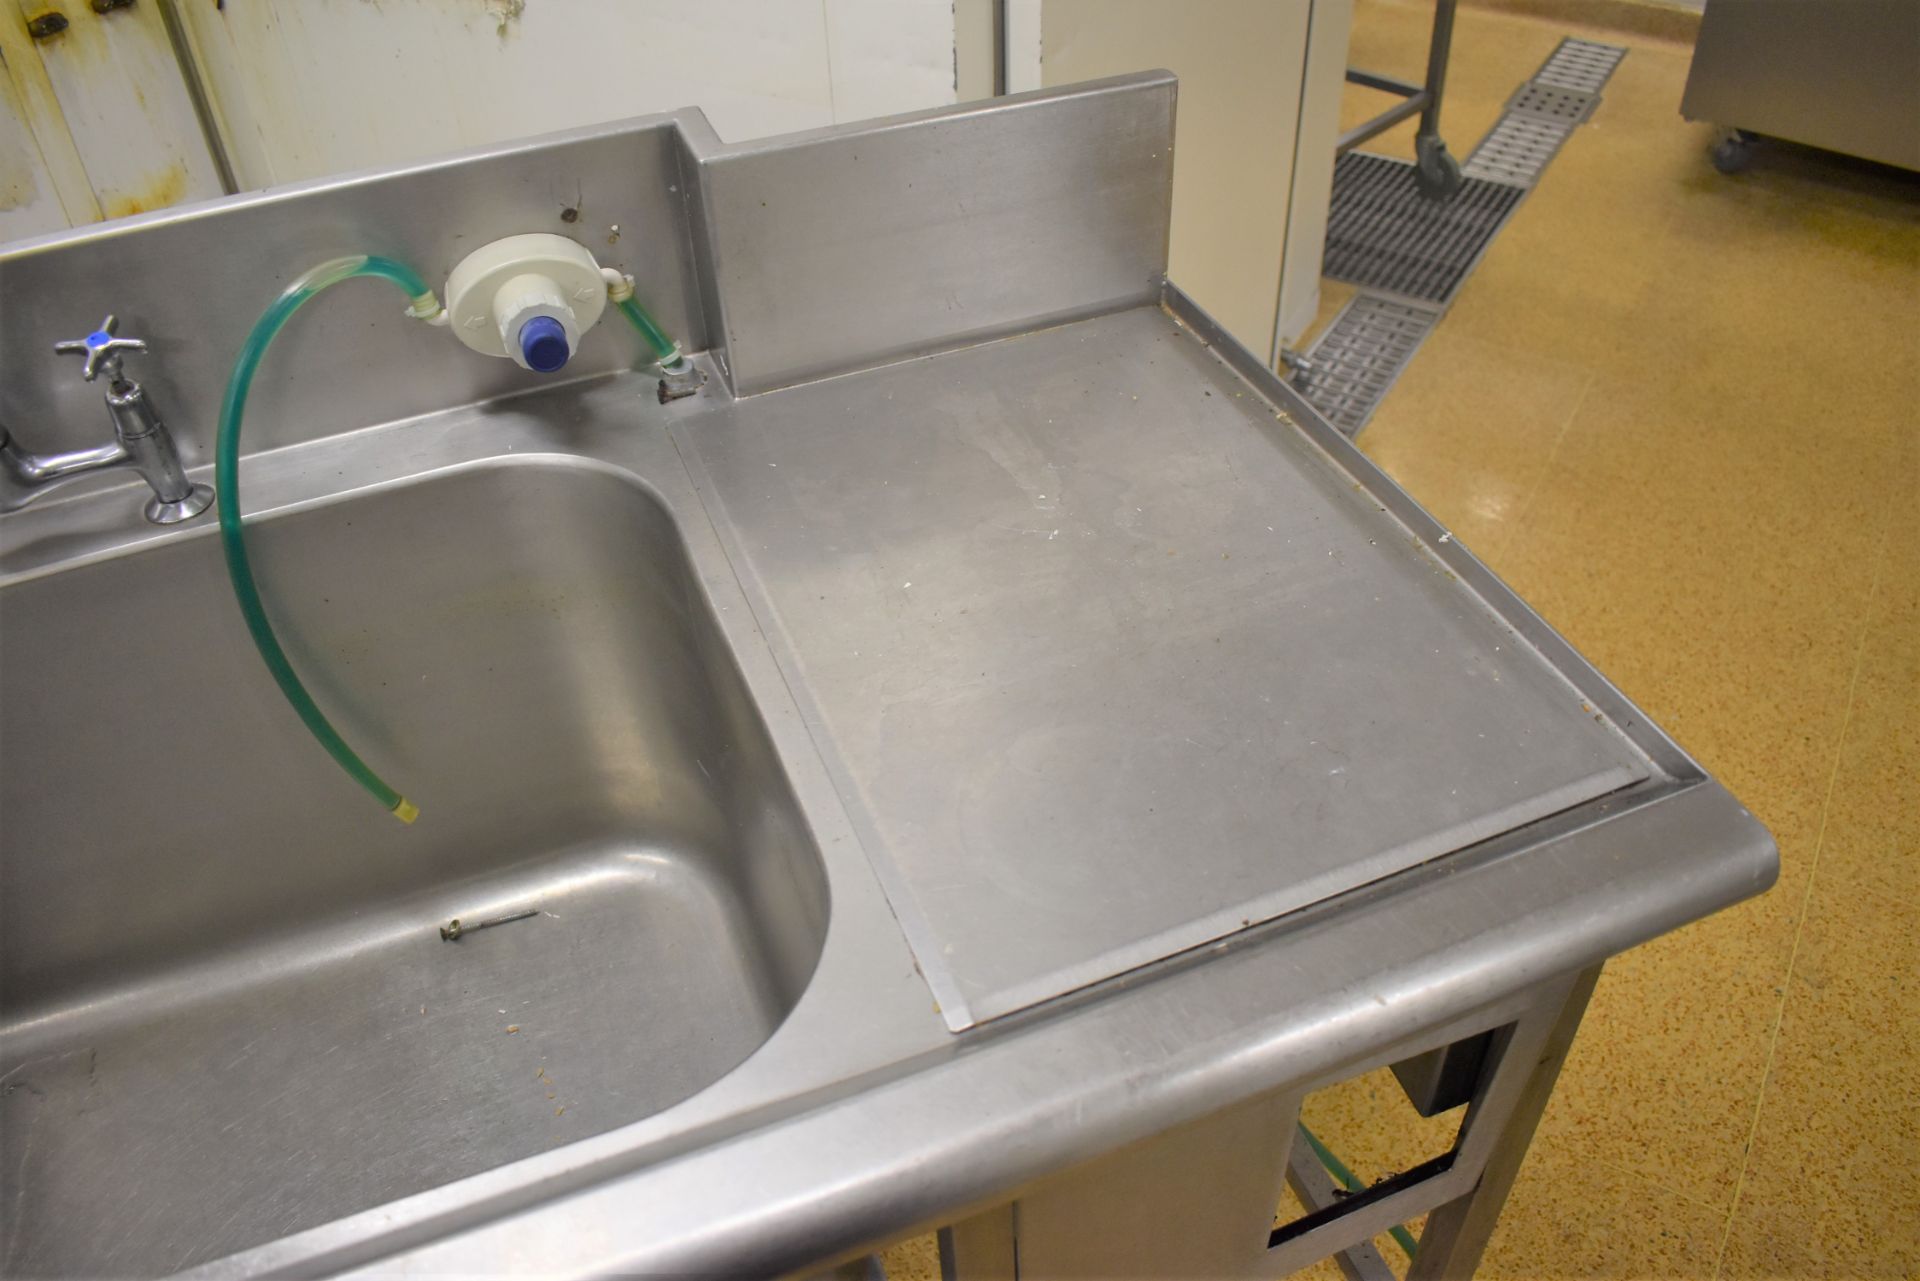 1 x Large Stainless Steel Wash Unit With Twin Deep Sink Basins, Hose Rinser Tap, Mixer Taps, - Image 5 of 10